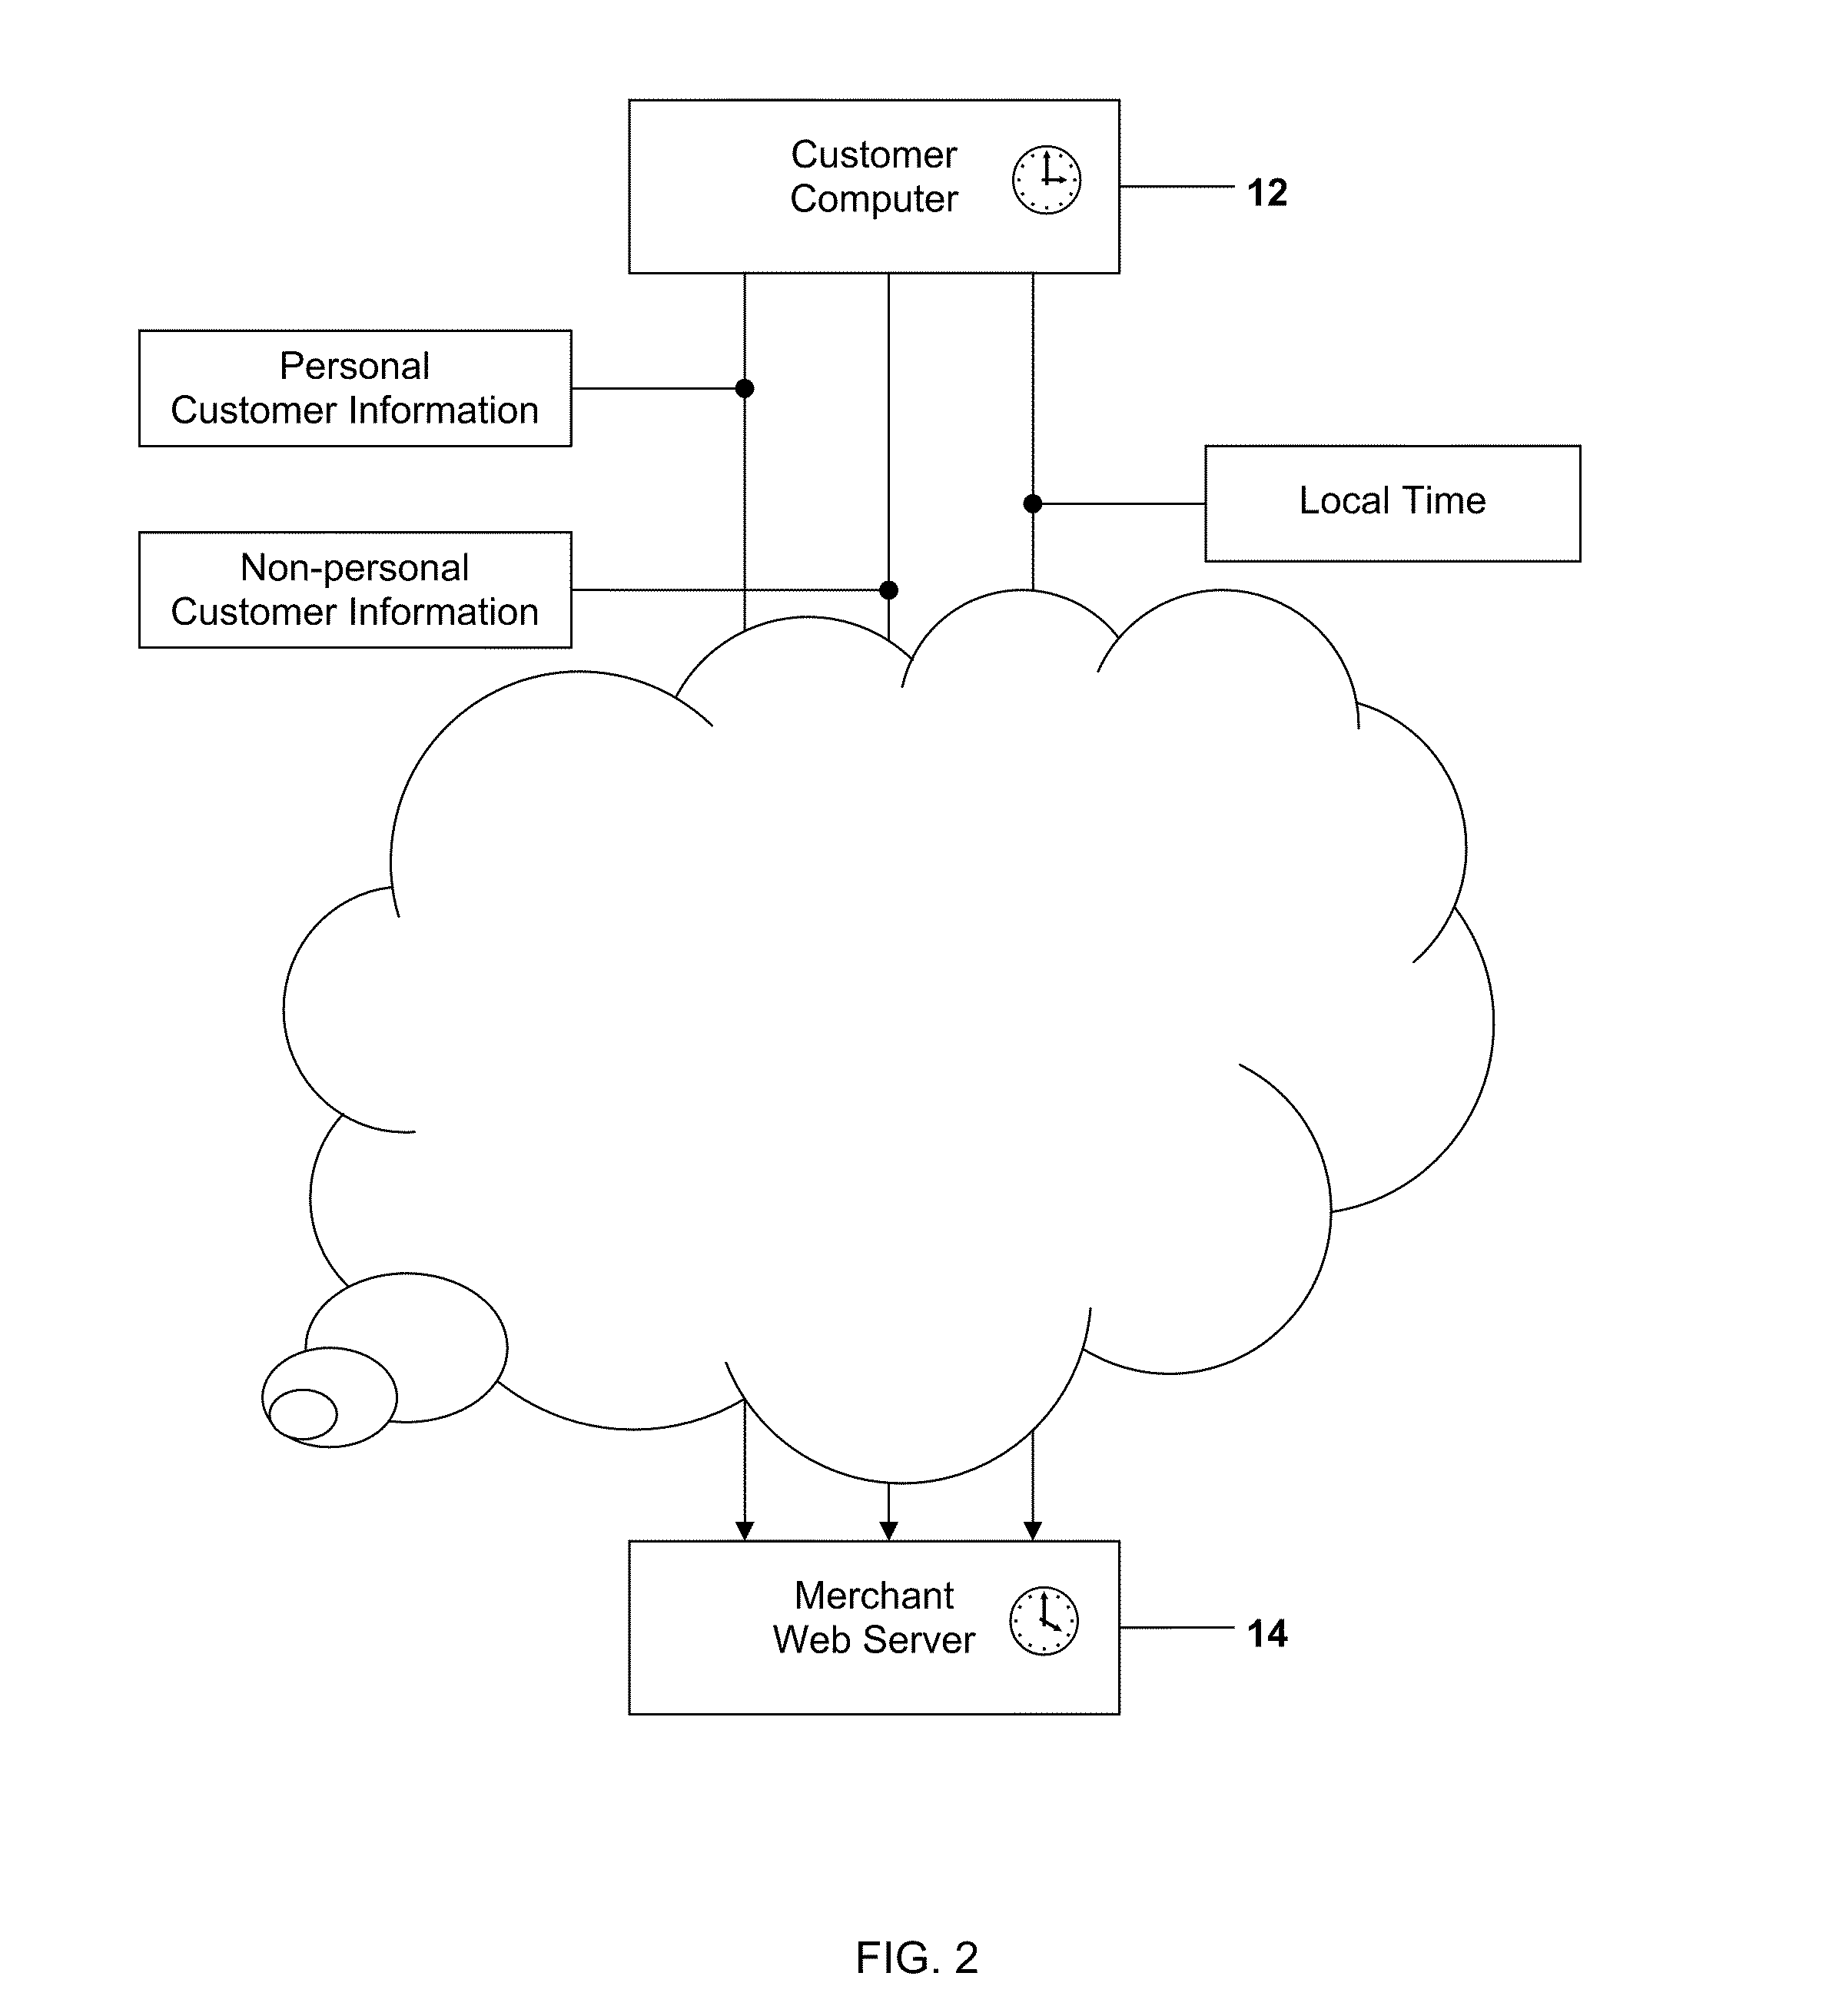 Method and System for Identifying Users and Detecting Fraud by Use of the Internet